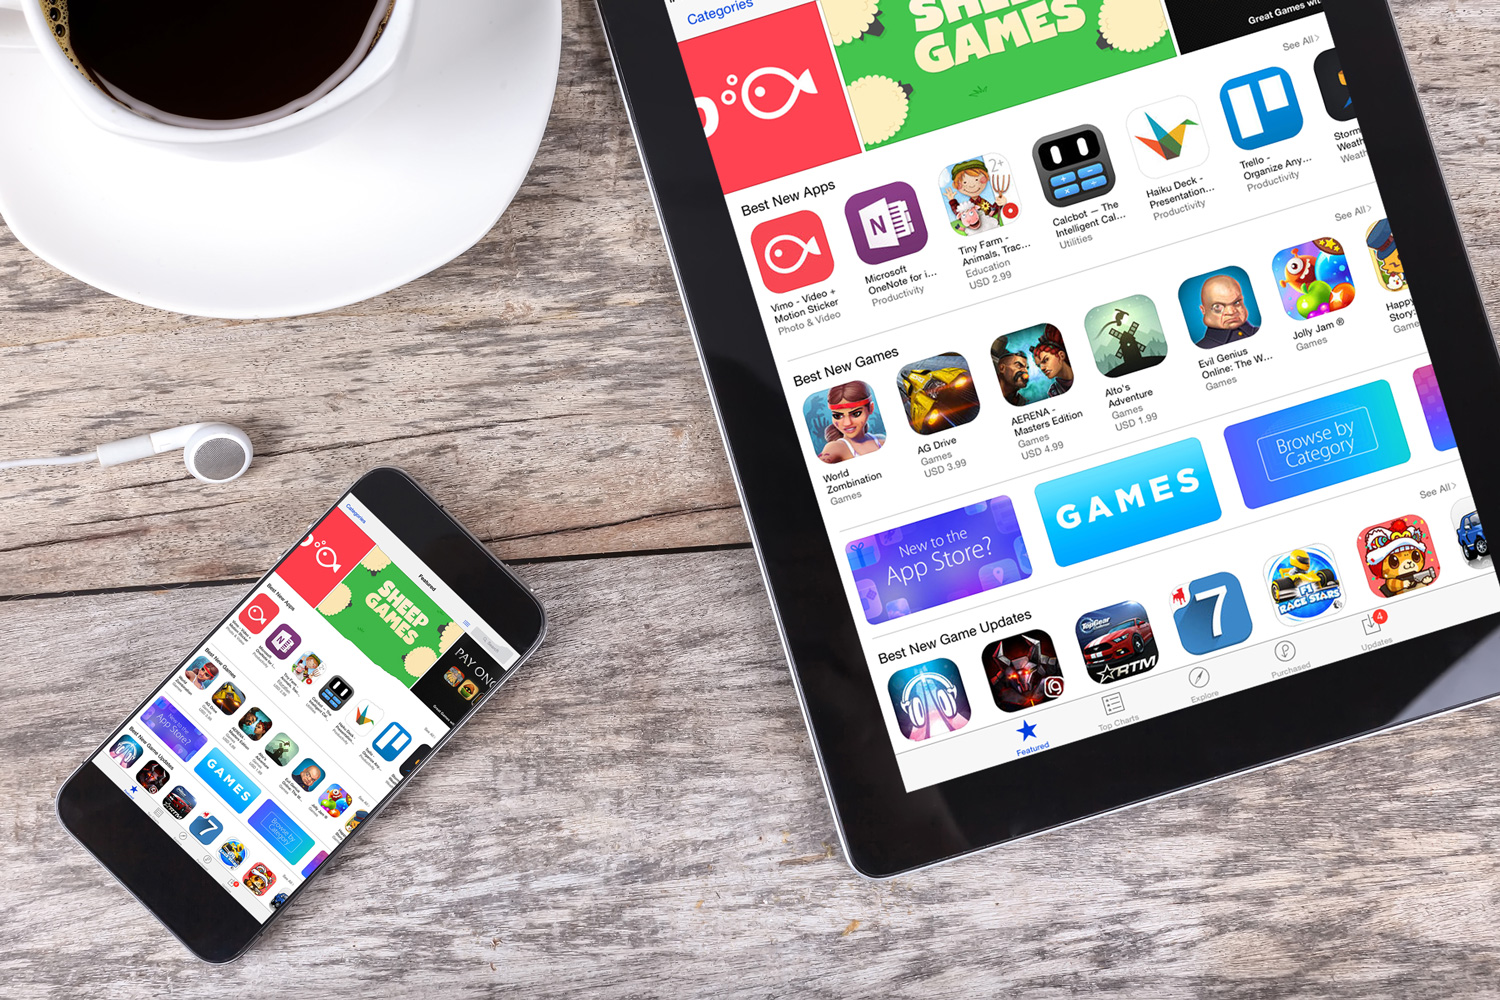 13 Advanced Rules to Get Featured on the App Store